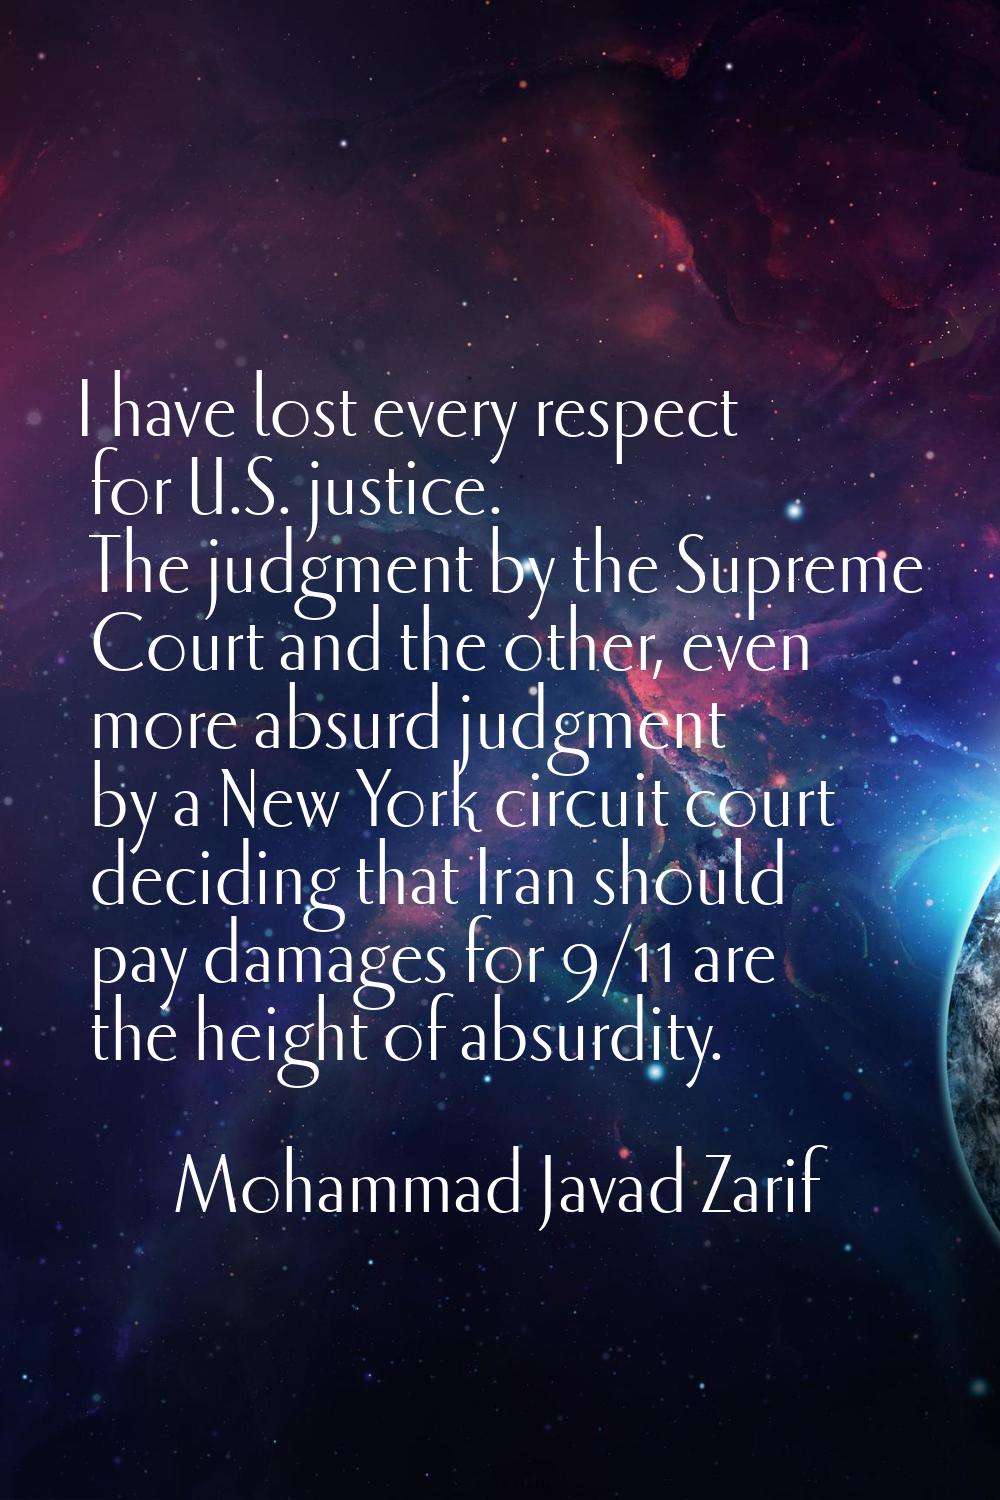 I have lost every respect for U.S. justice. The judgment by the Supreme Court and the other, even m